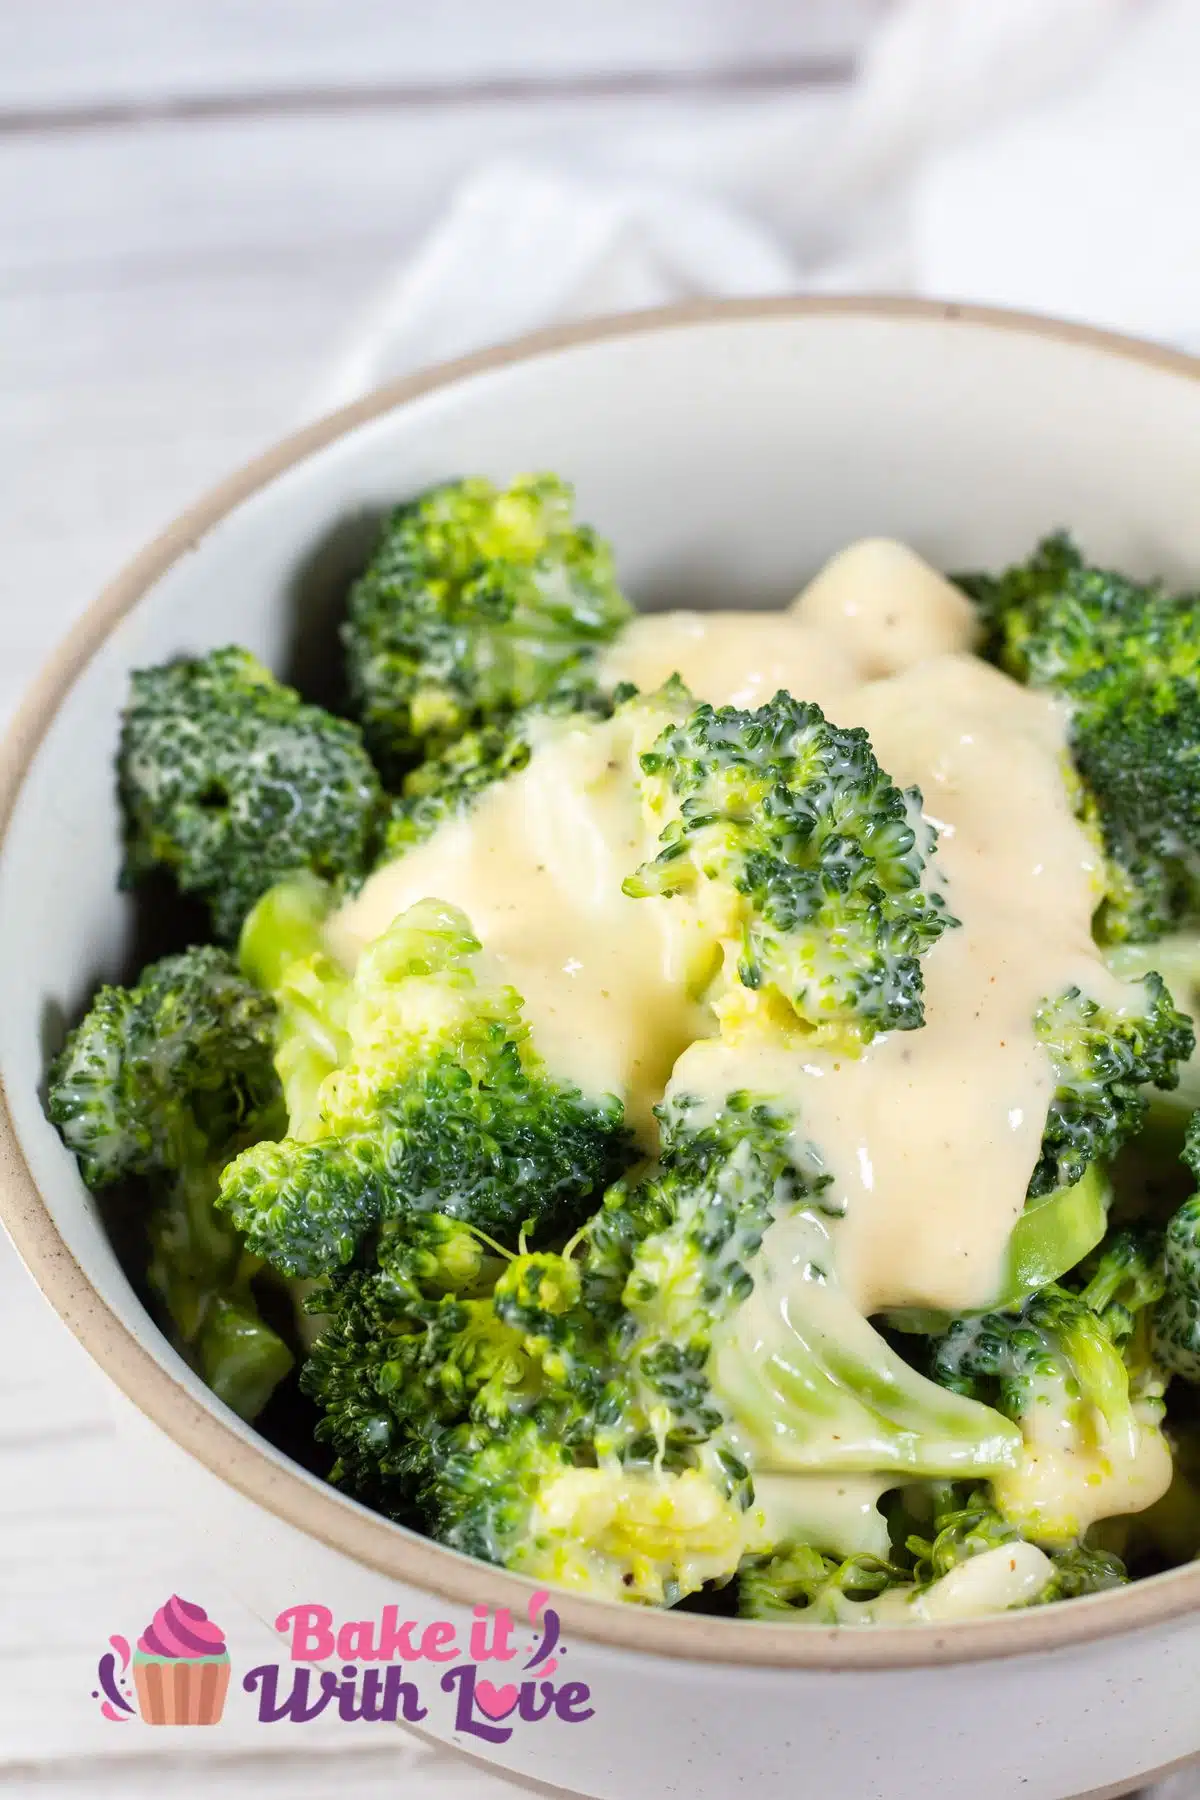 Tall image showing broccoli and cheese.